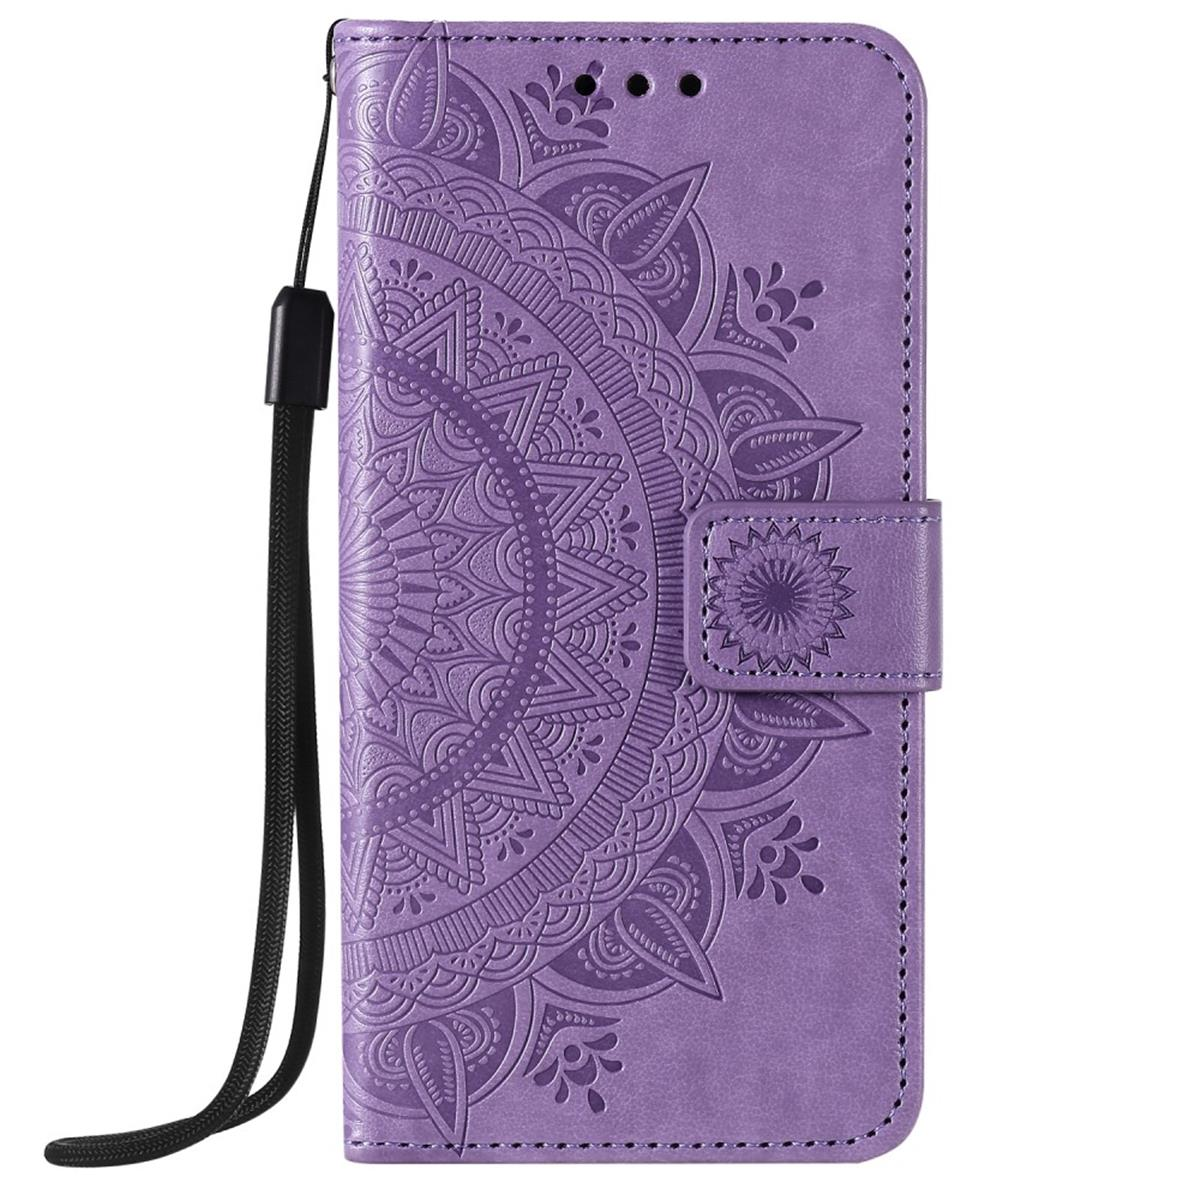 COVERKINGZ Klapphülle Max, 12 Mandala iPhone Pro Bookcover, Lila Muster, mit Apple